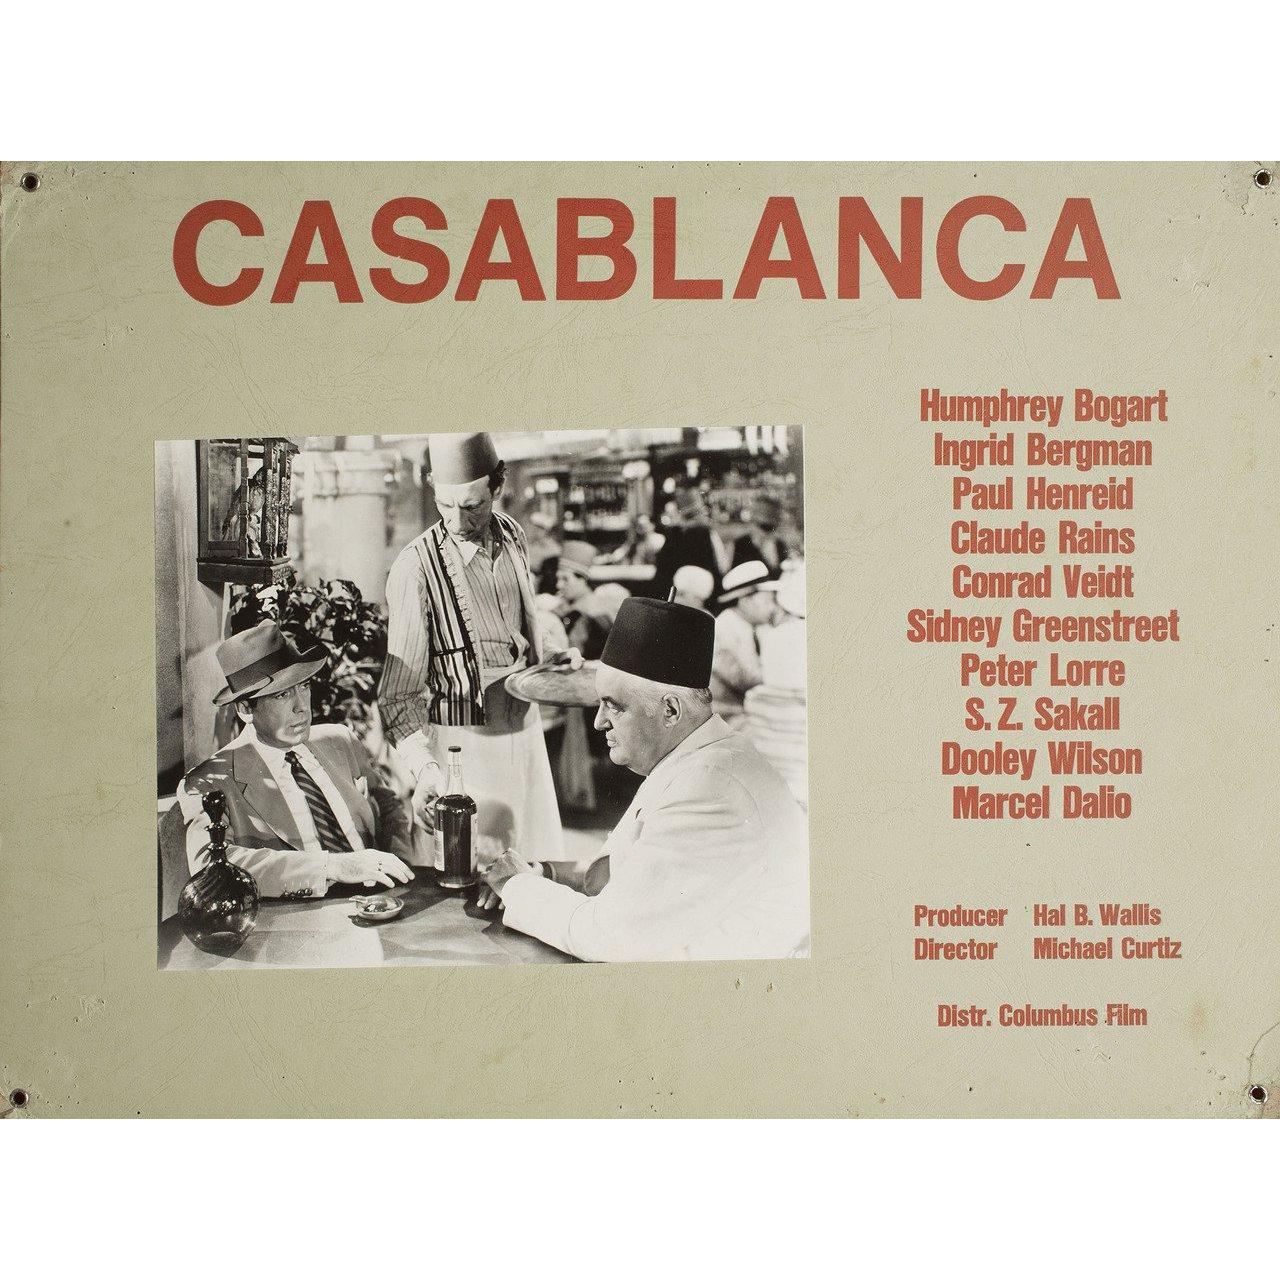 Original 1960s Swiss scene card for the 1942 film “Casablanca” directed by Michael Curtiz with Humphrey Bogart / Ingrid Bergman / Paul Henreid / Claude Rains. Very good-fine condition. Please note: the size is stated in inches and the actual size